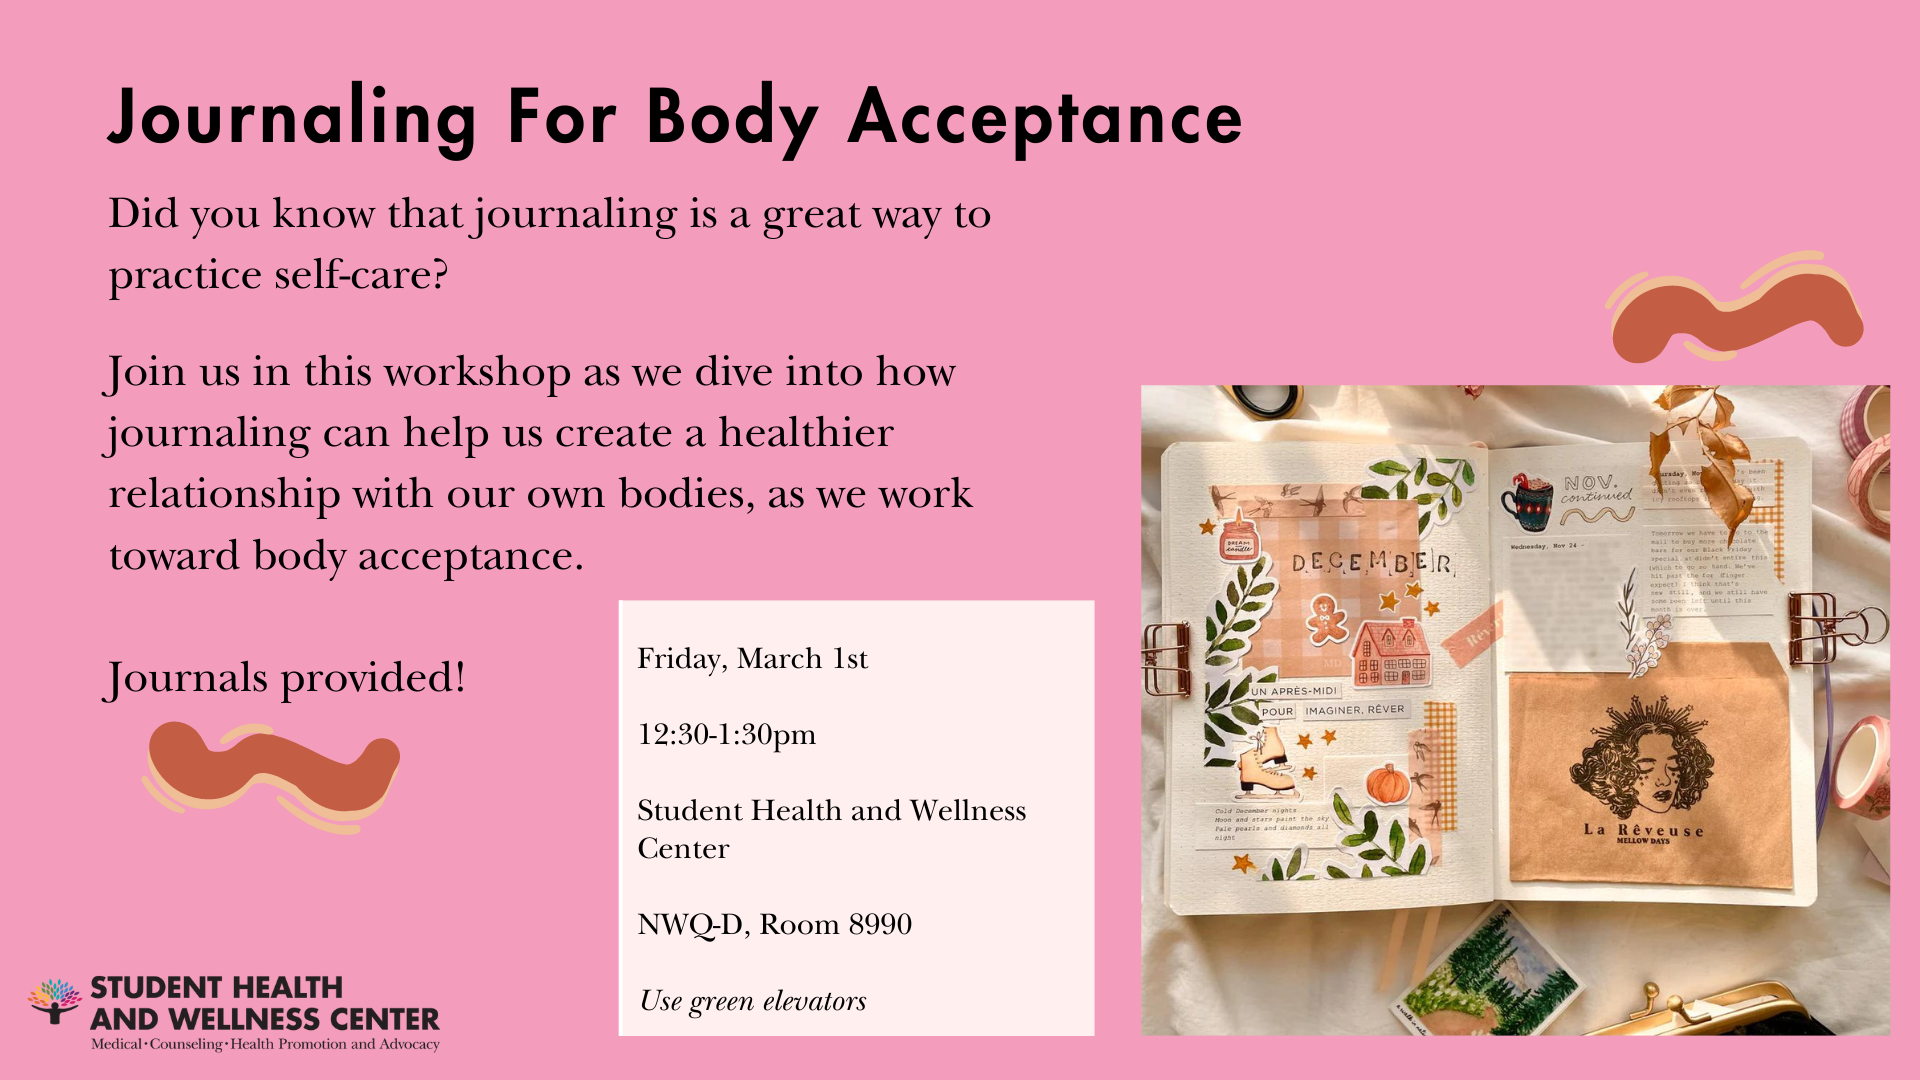 A graphic announcing a journaling event in the Student Health and Wellness Center in March.